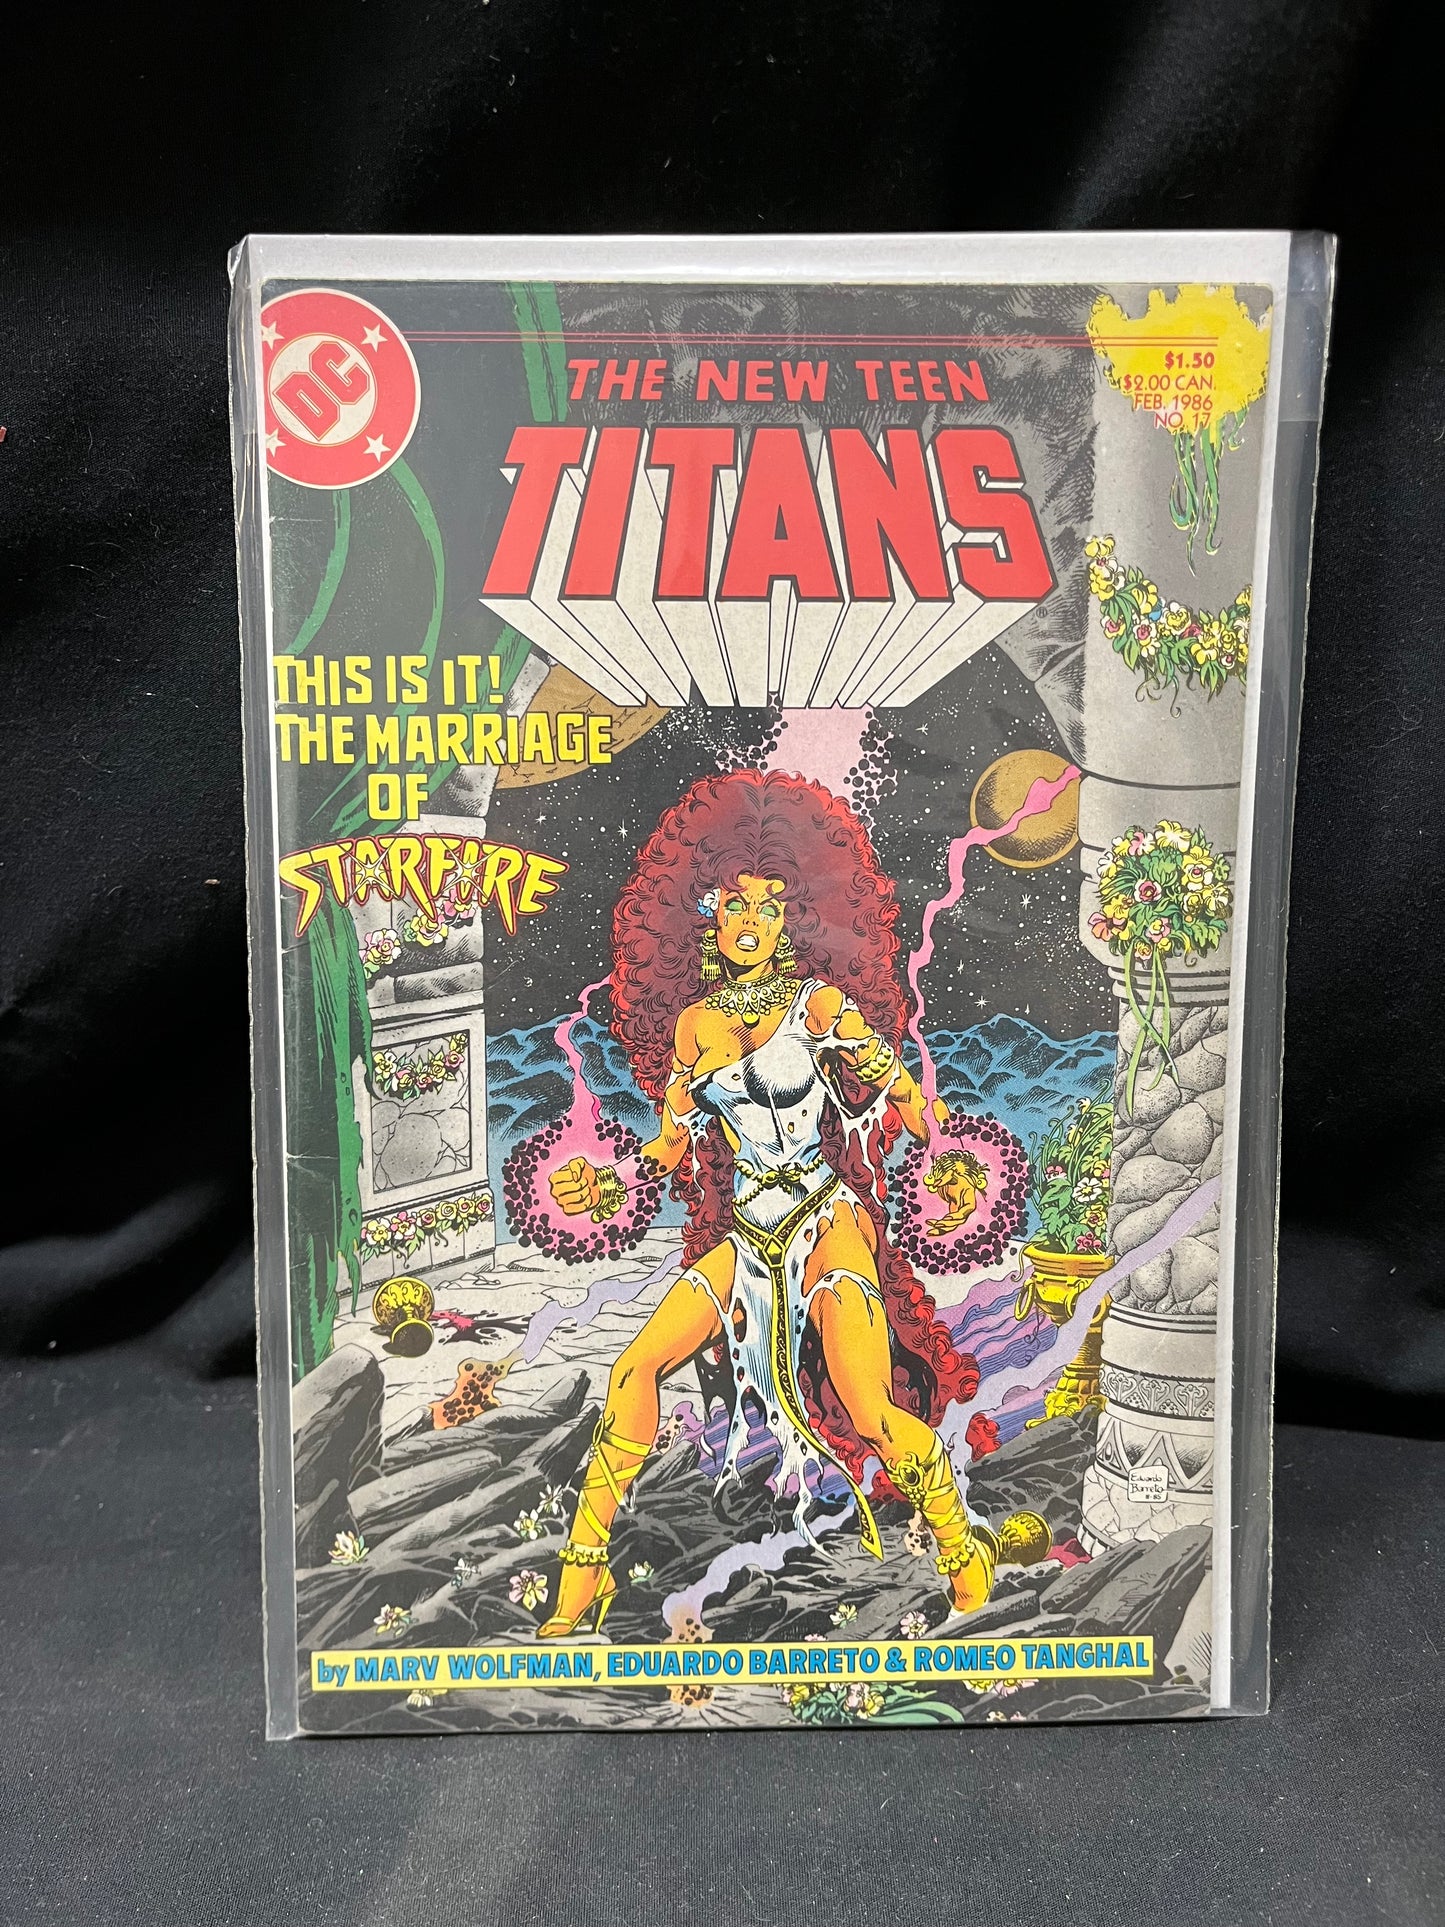 The New Teen Titans Comic Book - No. 17 This Is It! The Marriage of Starfire